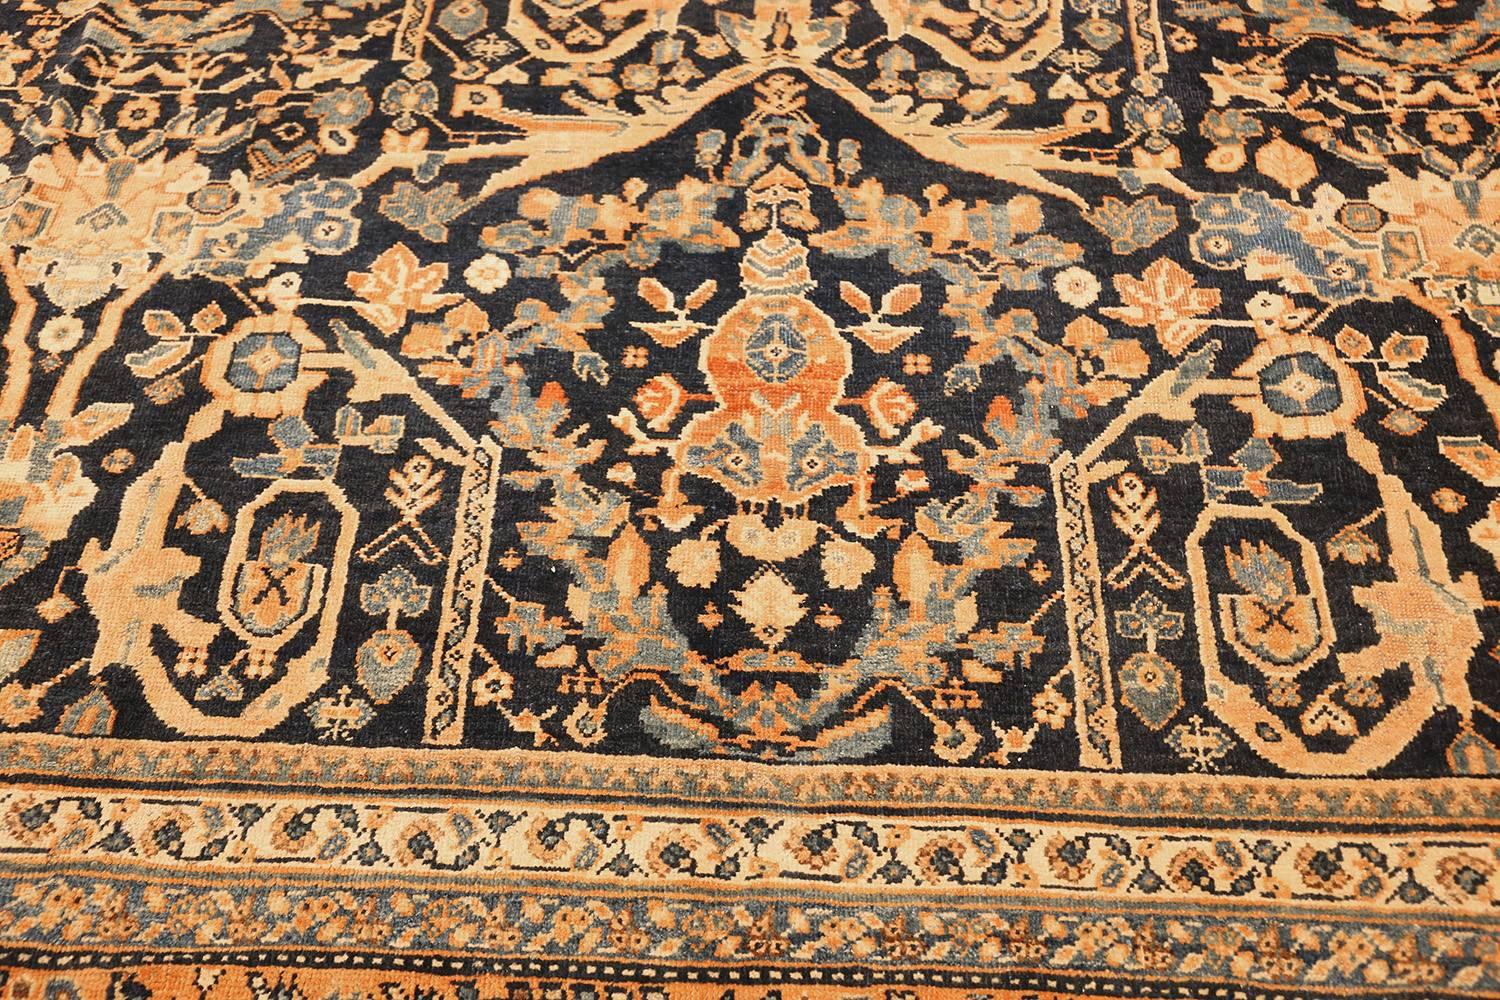 An all-over design mostofi design that features curling vine scrolls in staggered symmetry throughout the field of this stunning antique Persian Sultanabad carpet.

Beautiful room size antique Persian Mahal Sultanabad rug, country of origin: